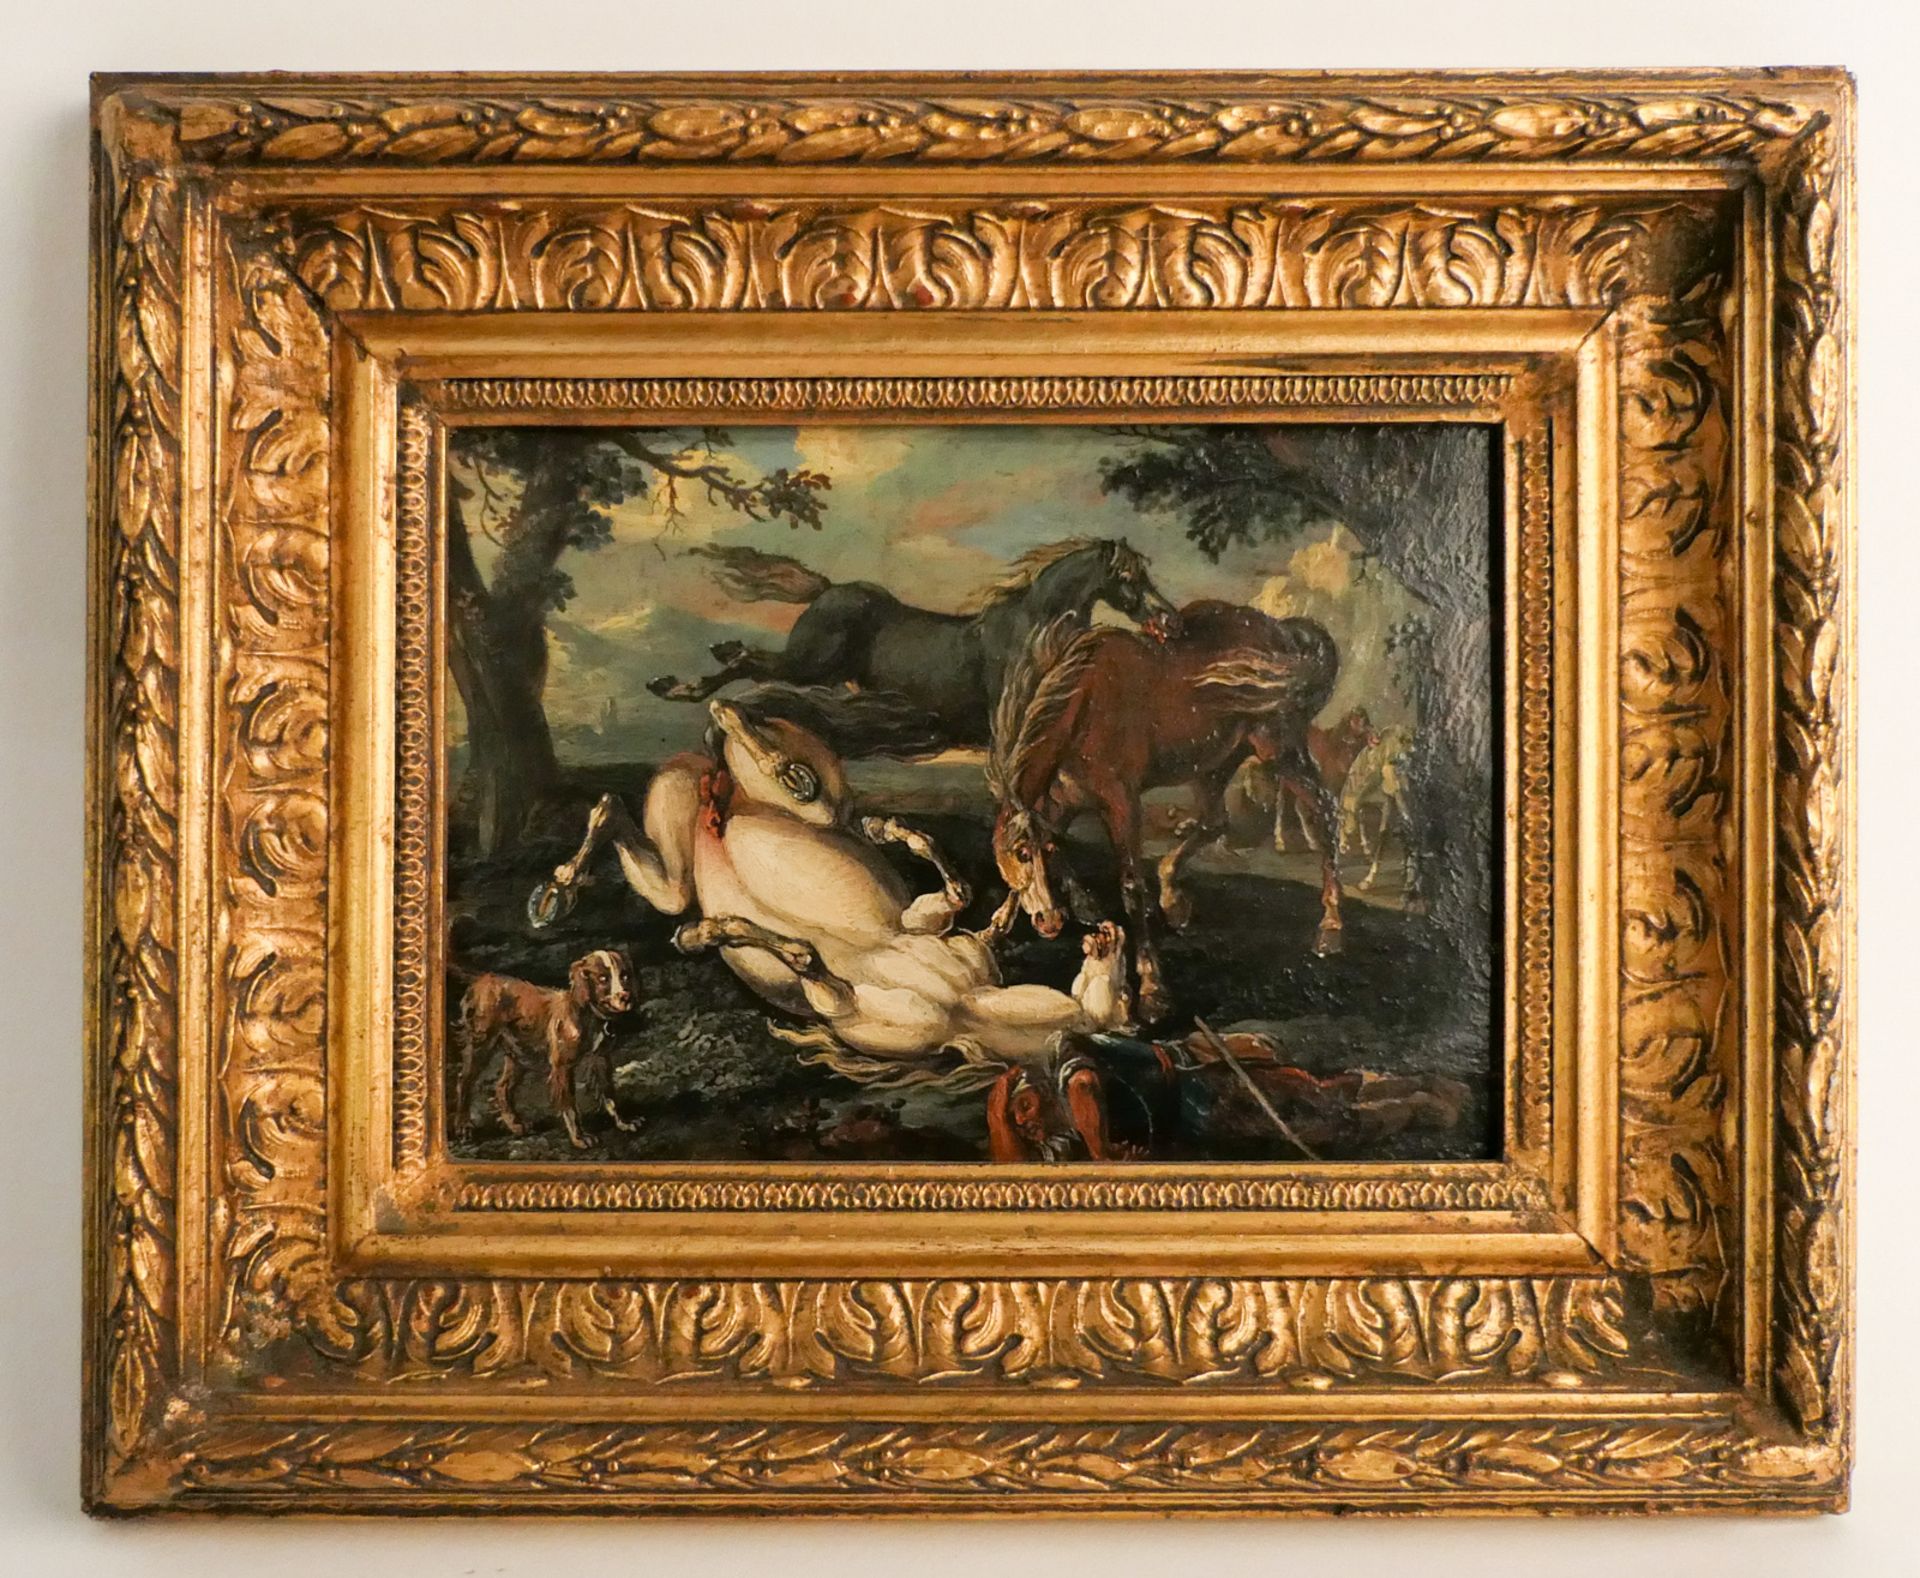 ... Abraham (?), an animated horse study, signed and dated 1727 on the back, oil on metal, 16 x 22,5 - Image 2 of 6